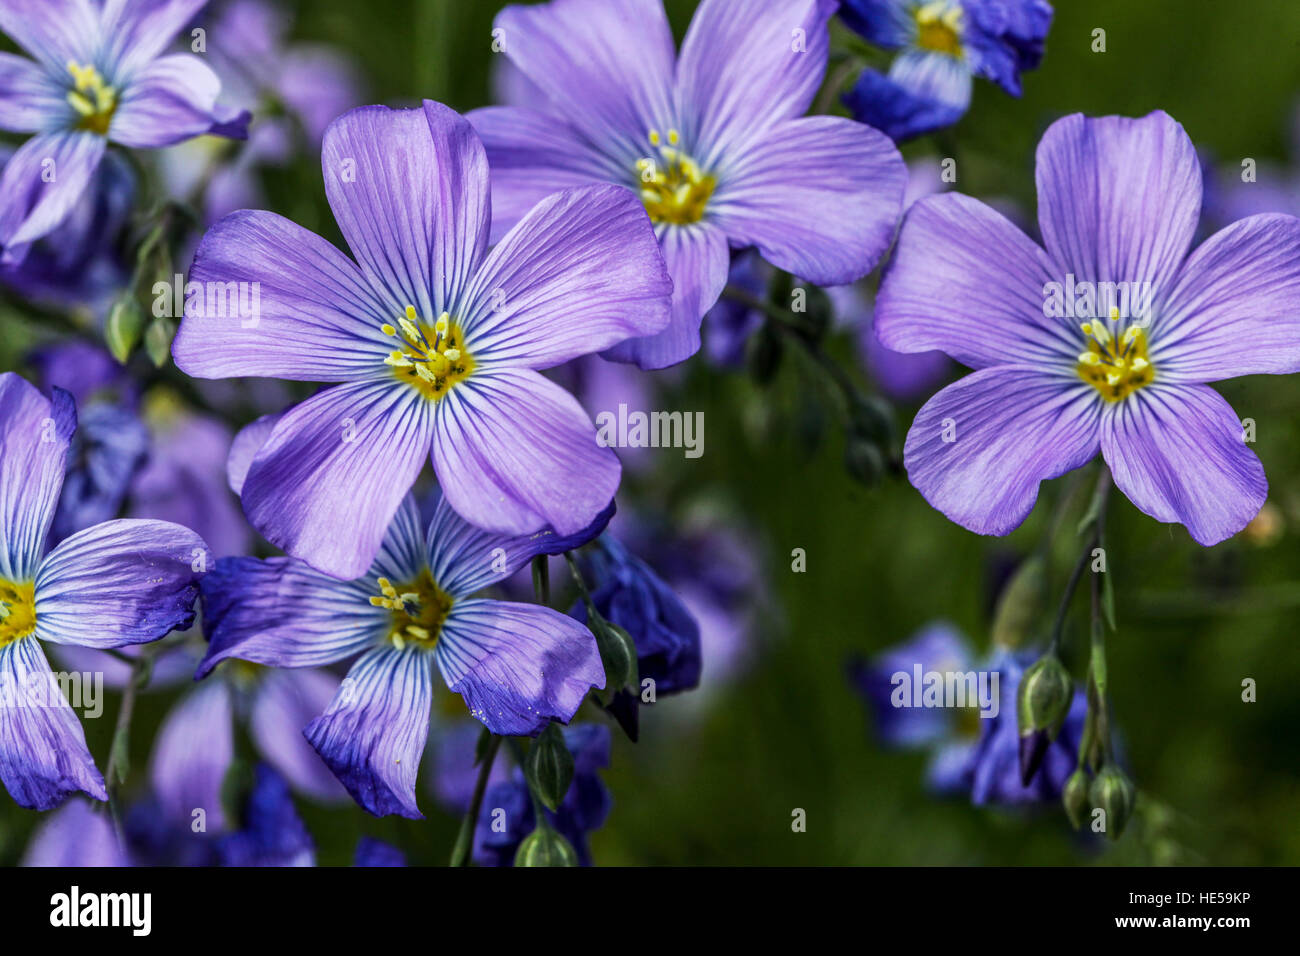 Linum perenne 'Saphyr', Blue flax, Lint or Perennial flax in bloom Stock Photo